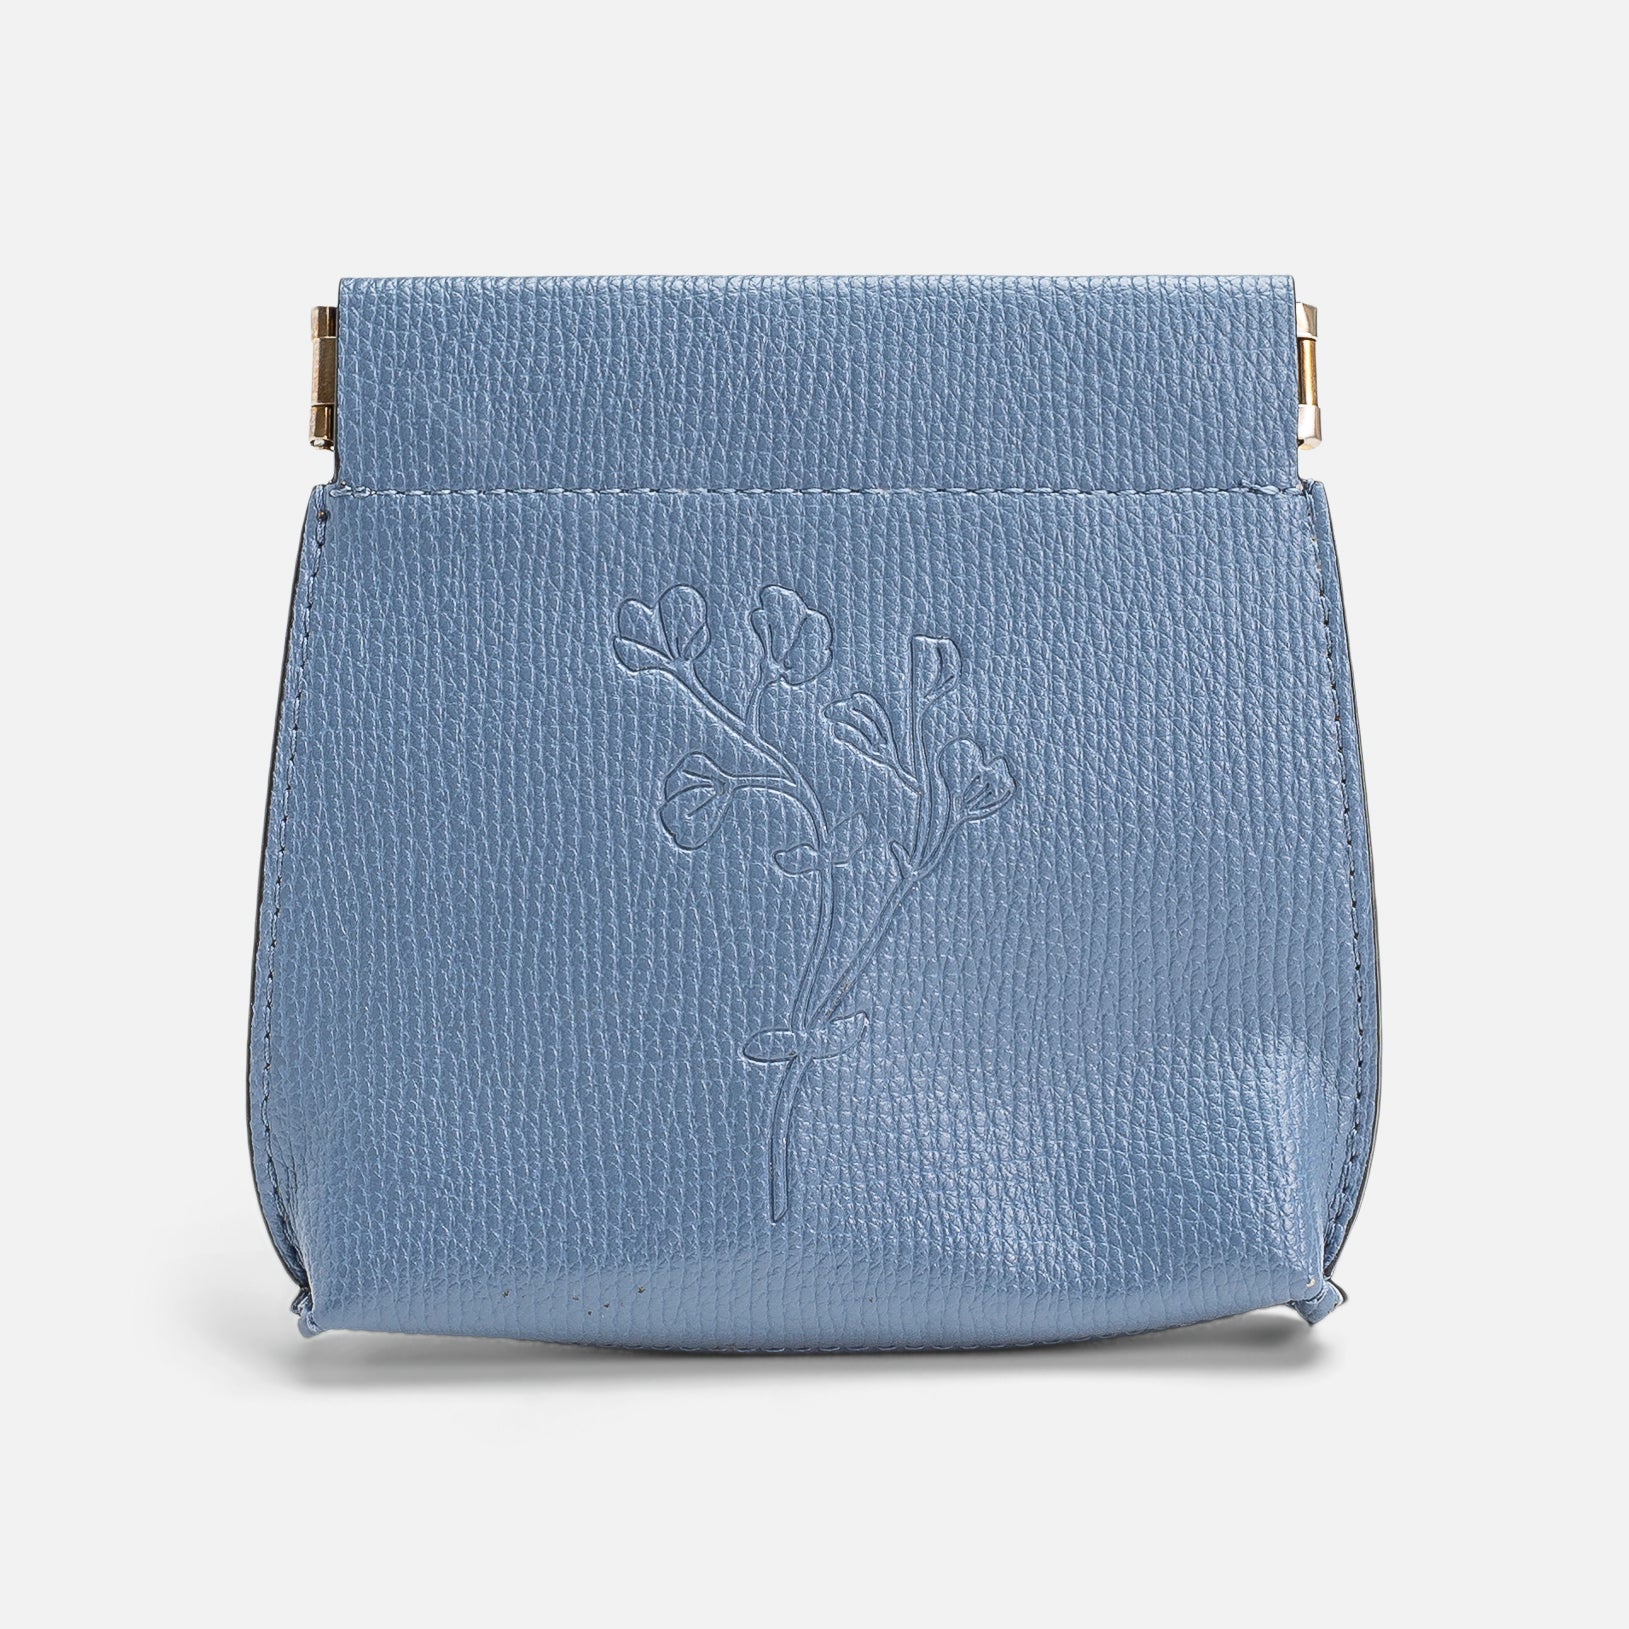 Light blue leatherette coin purse with snap closure